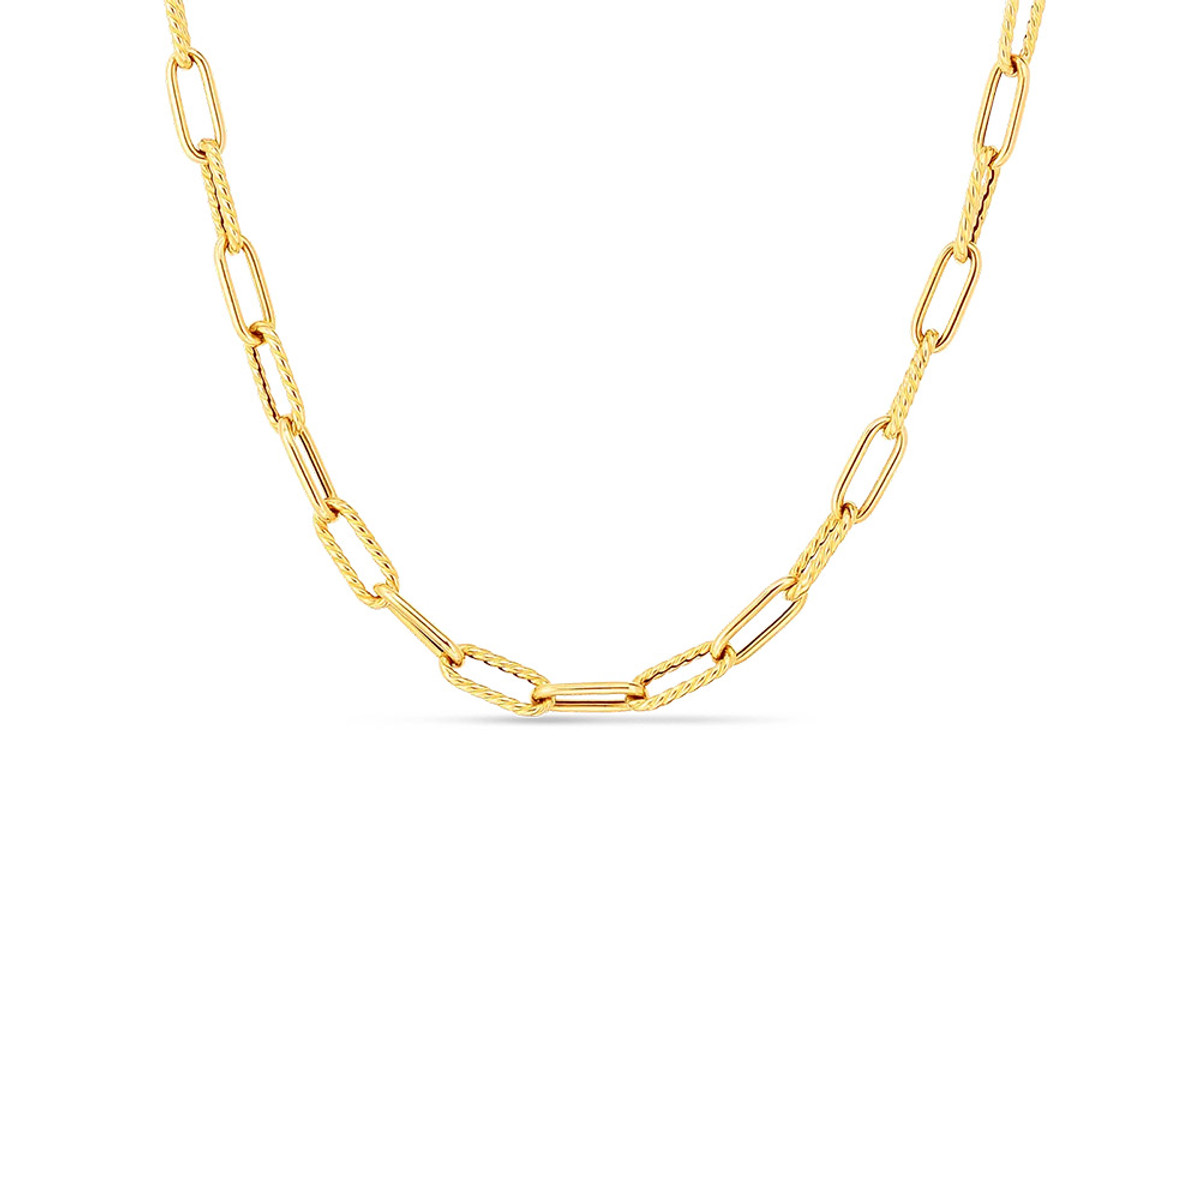 Roberto Coin 18K Yellow Gold Alternating Size Paperclip Link 22" Chain-43114 Product Image